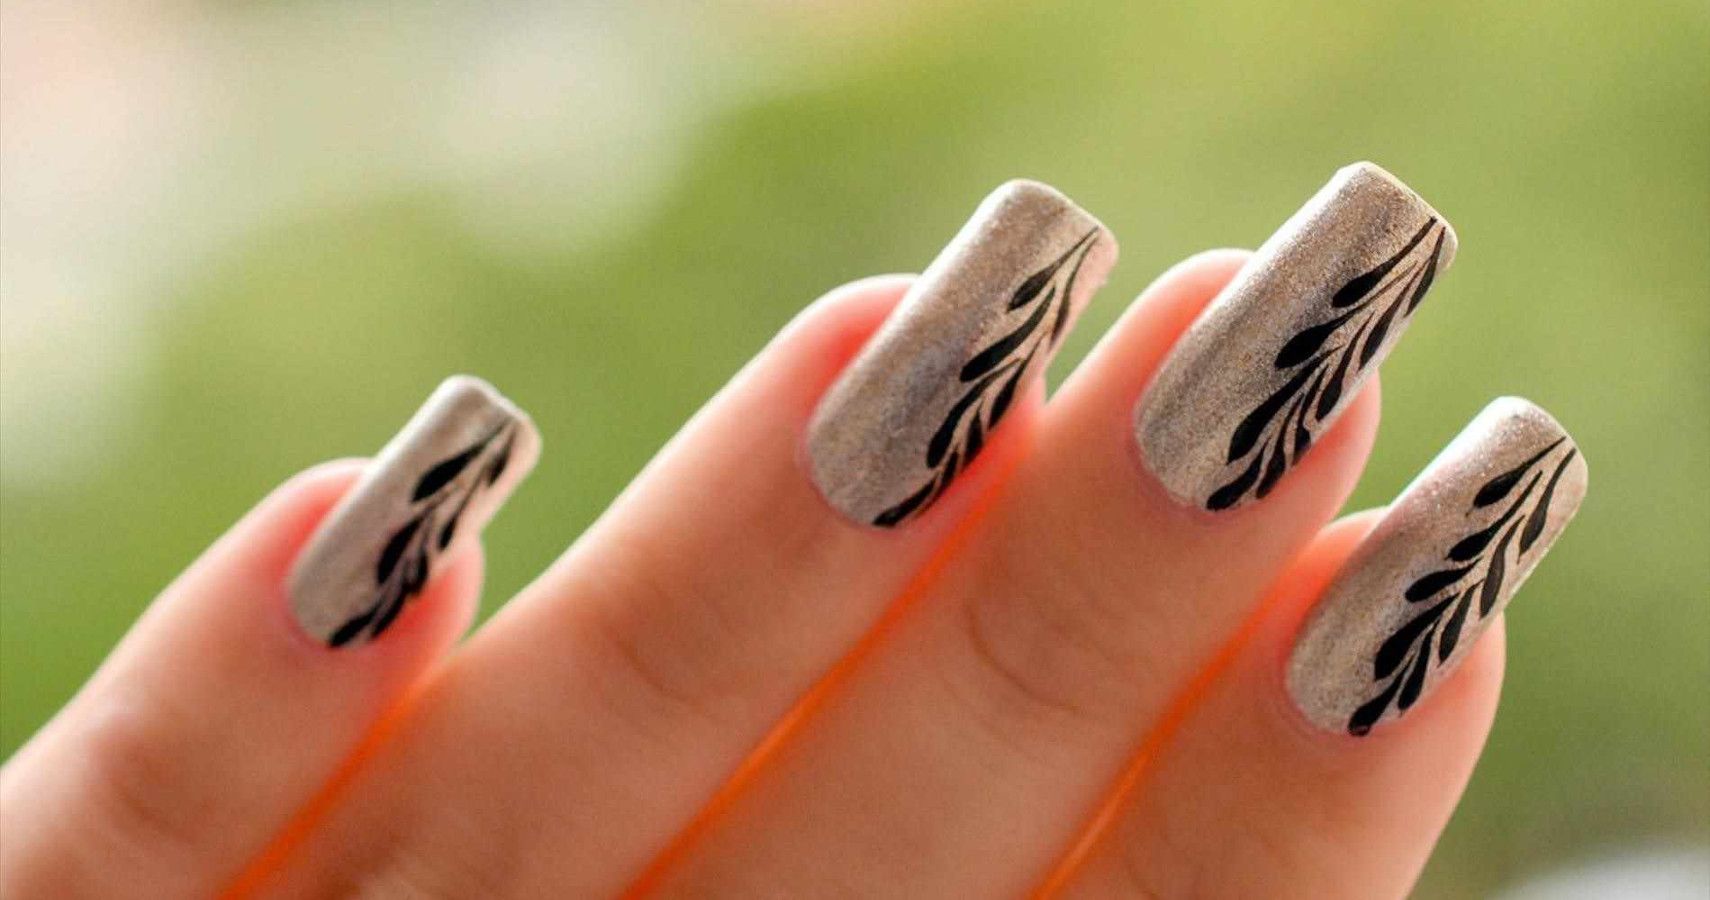 6 Of The Best At-Home Nail Art Tutorials